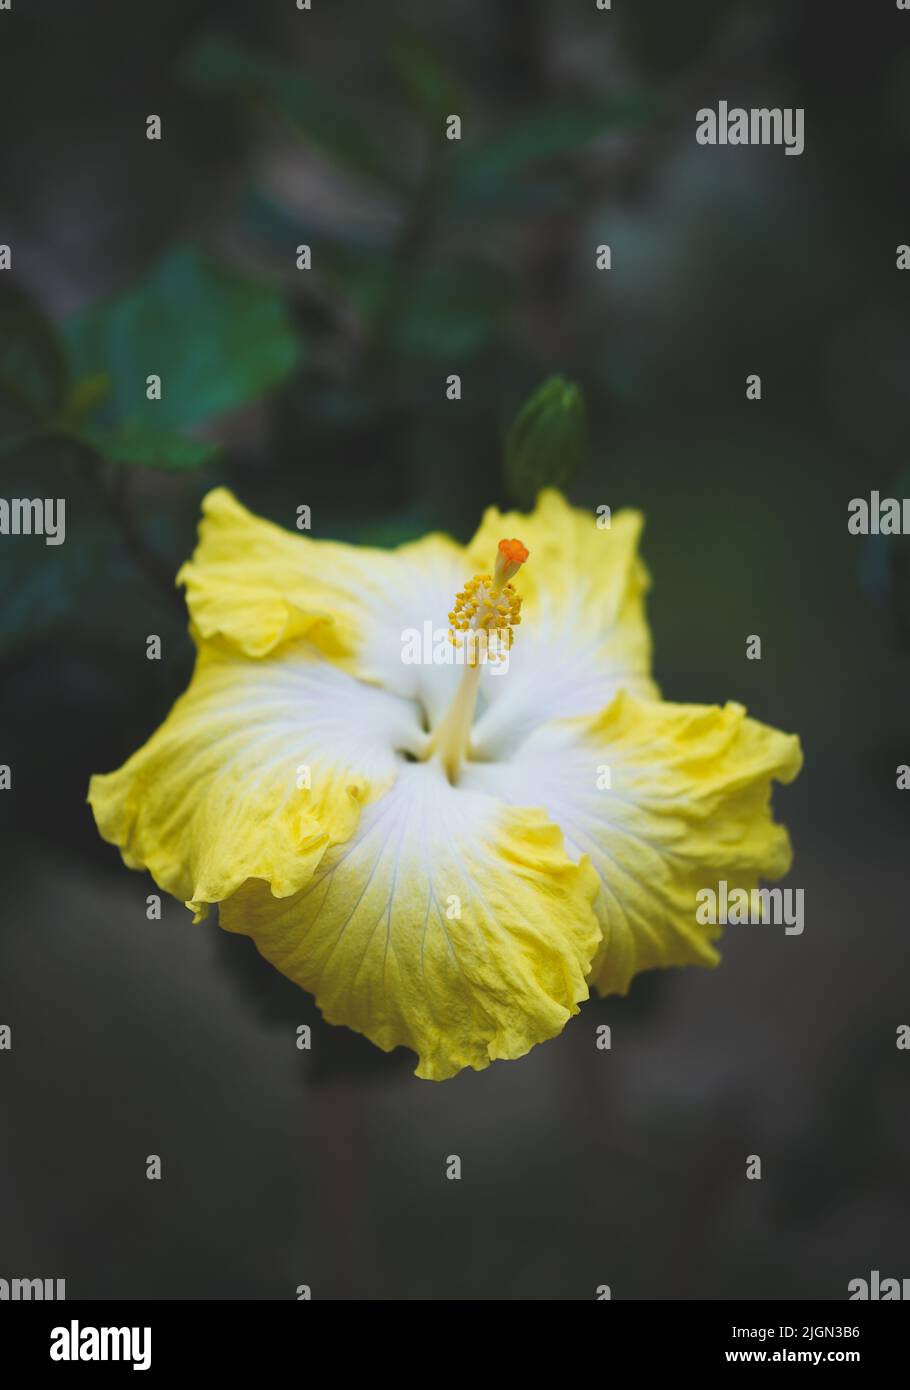 Close-up photo of blooming hawaiian hibiscus flower with yellow-white petal color Stock Photo